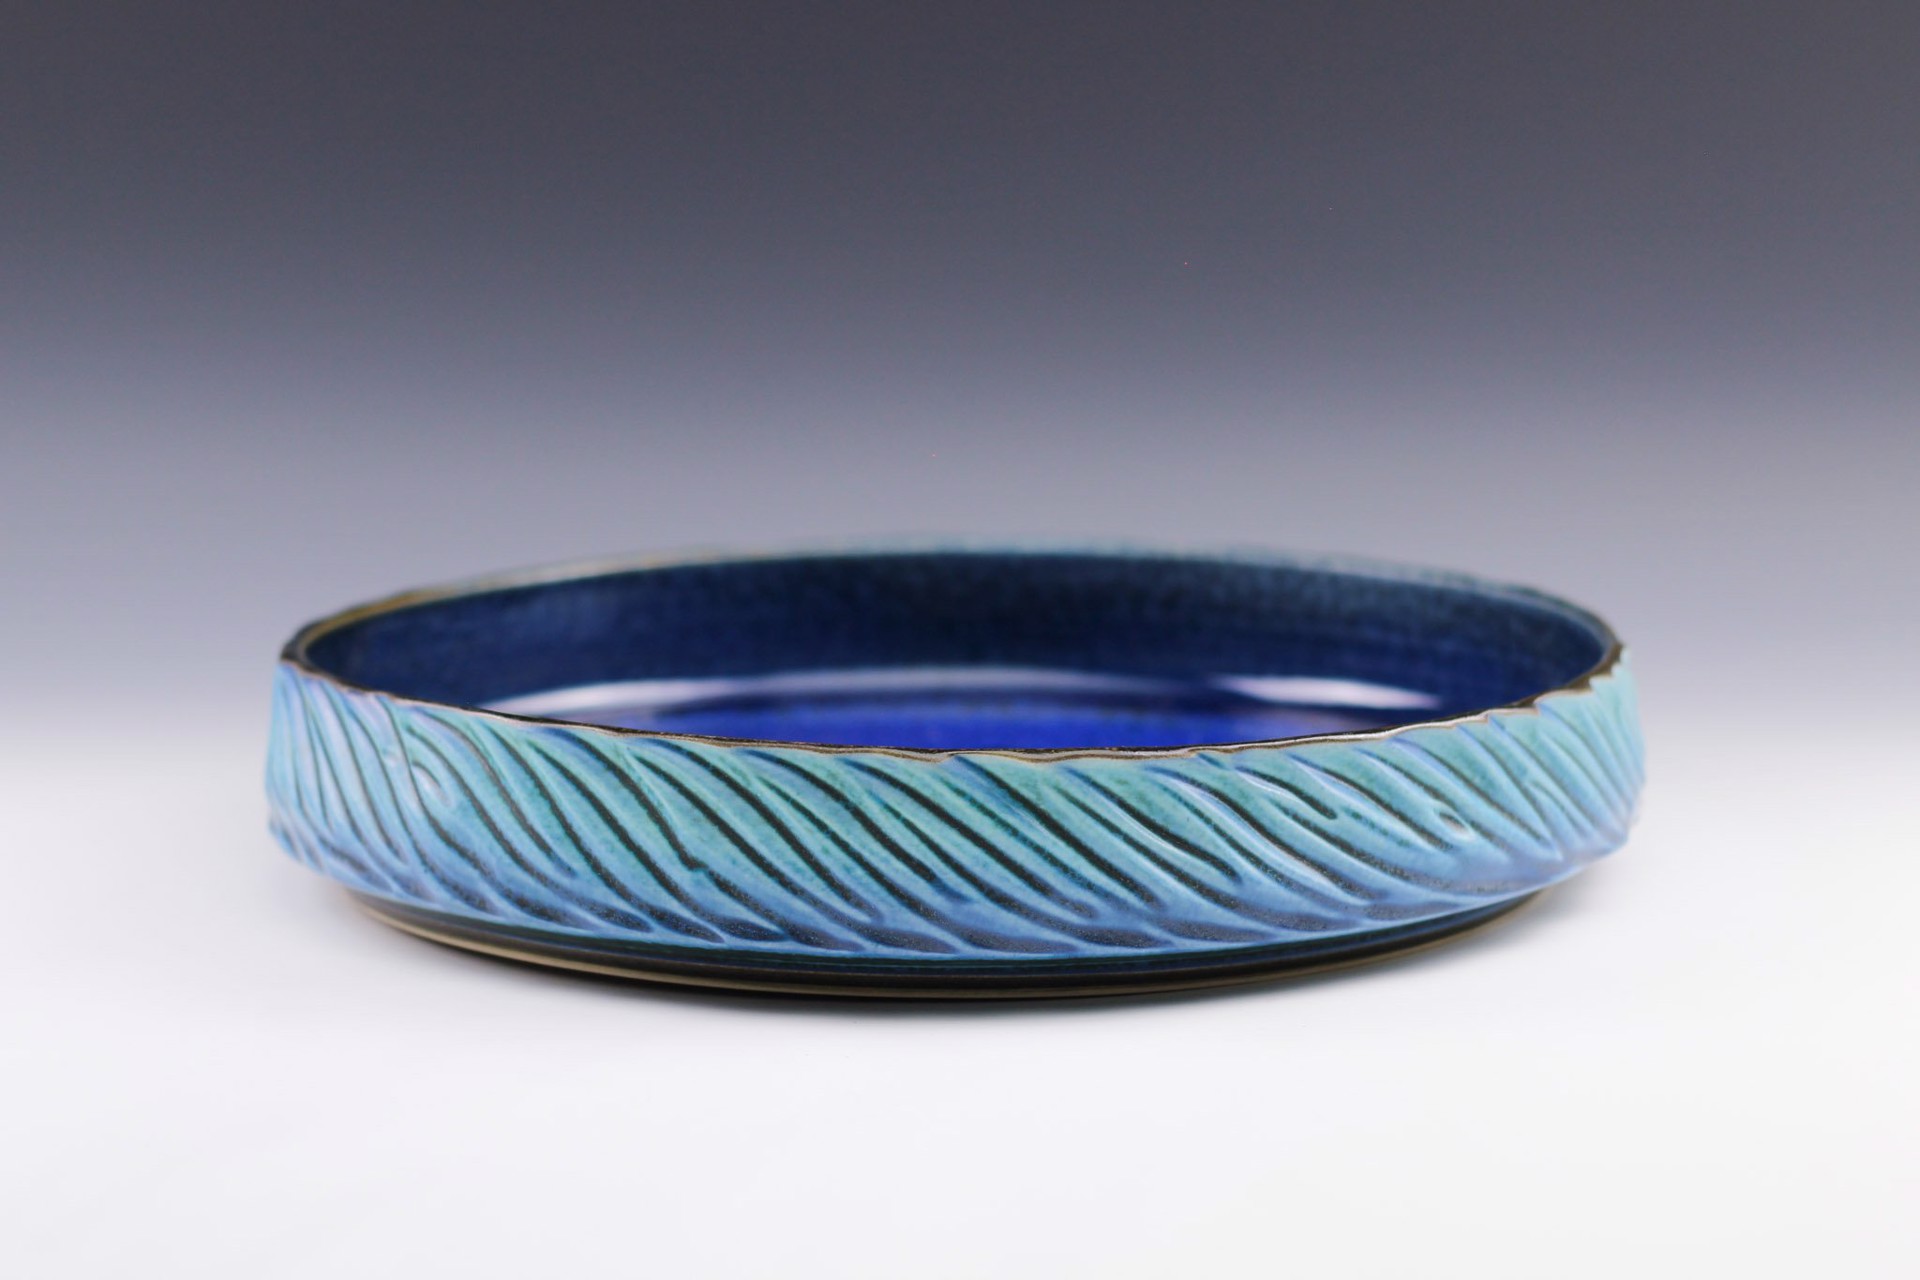 Low Serving Bowl by Paul Jeselskis